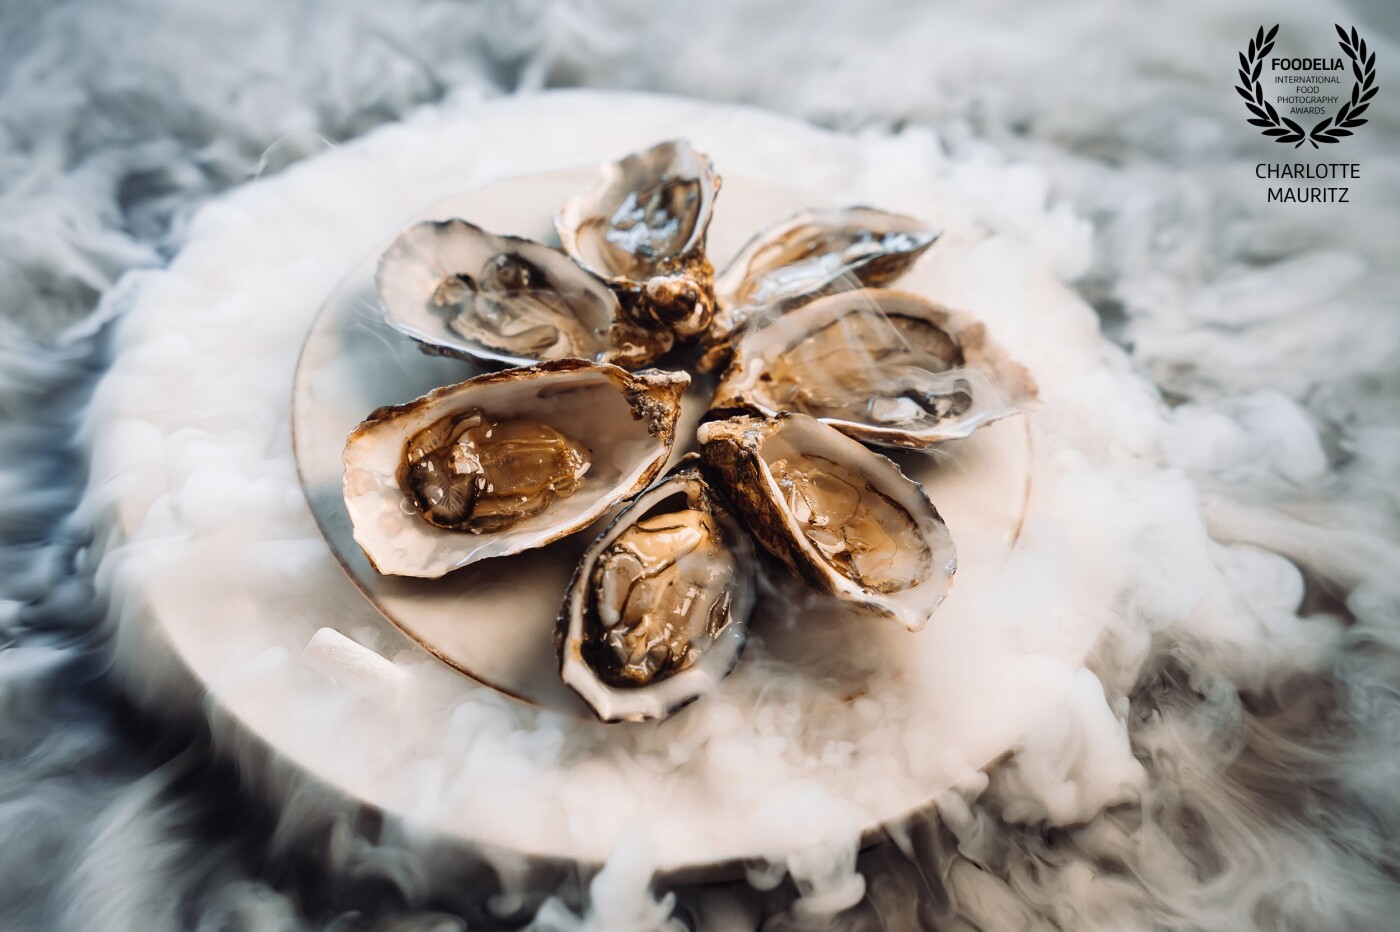 I was inspired to do something with dry ice. These Dutch oysters were the best models. I was excited to work with dry ice because of the movement.